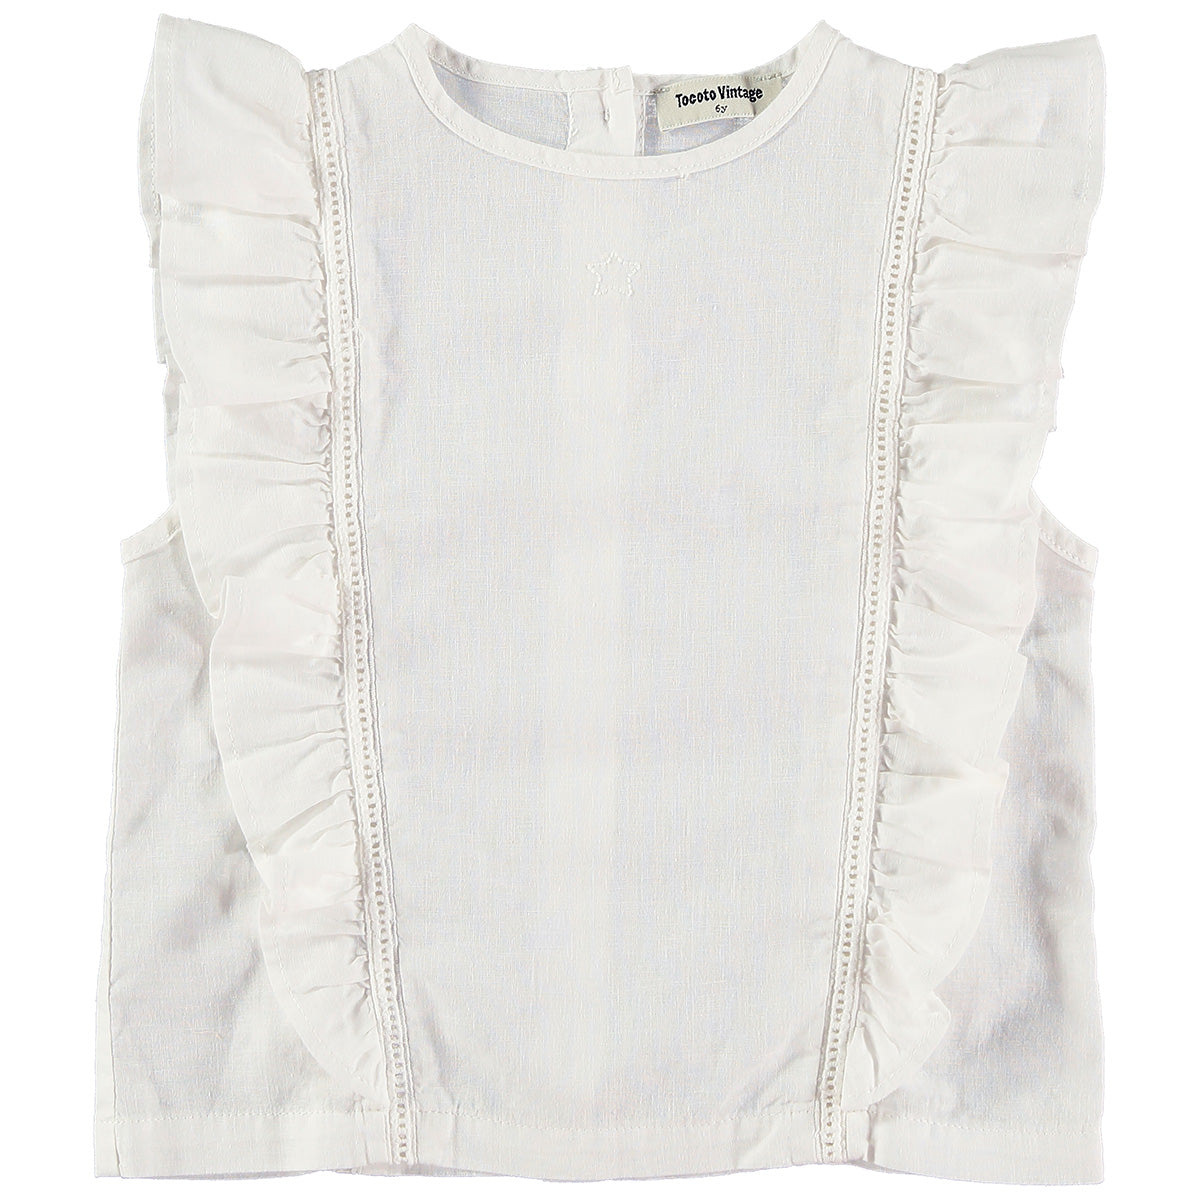 The Sleeveless Ruffled Blouse from Tocoto Vintage. Sleeveless blouse with ruffles. Made with cotton and linen.